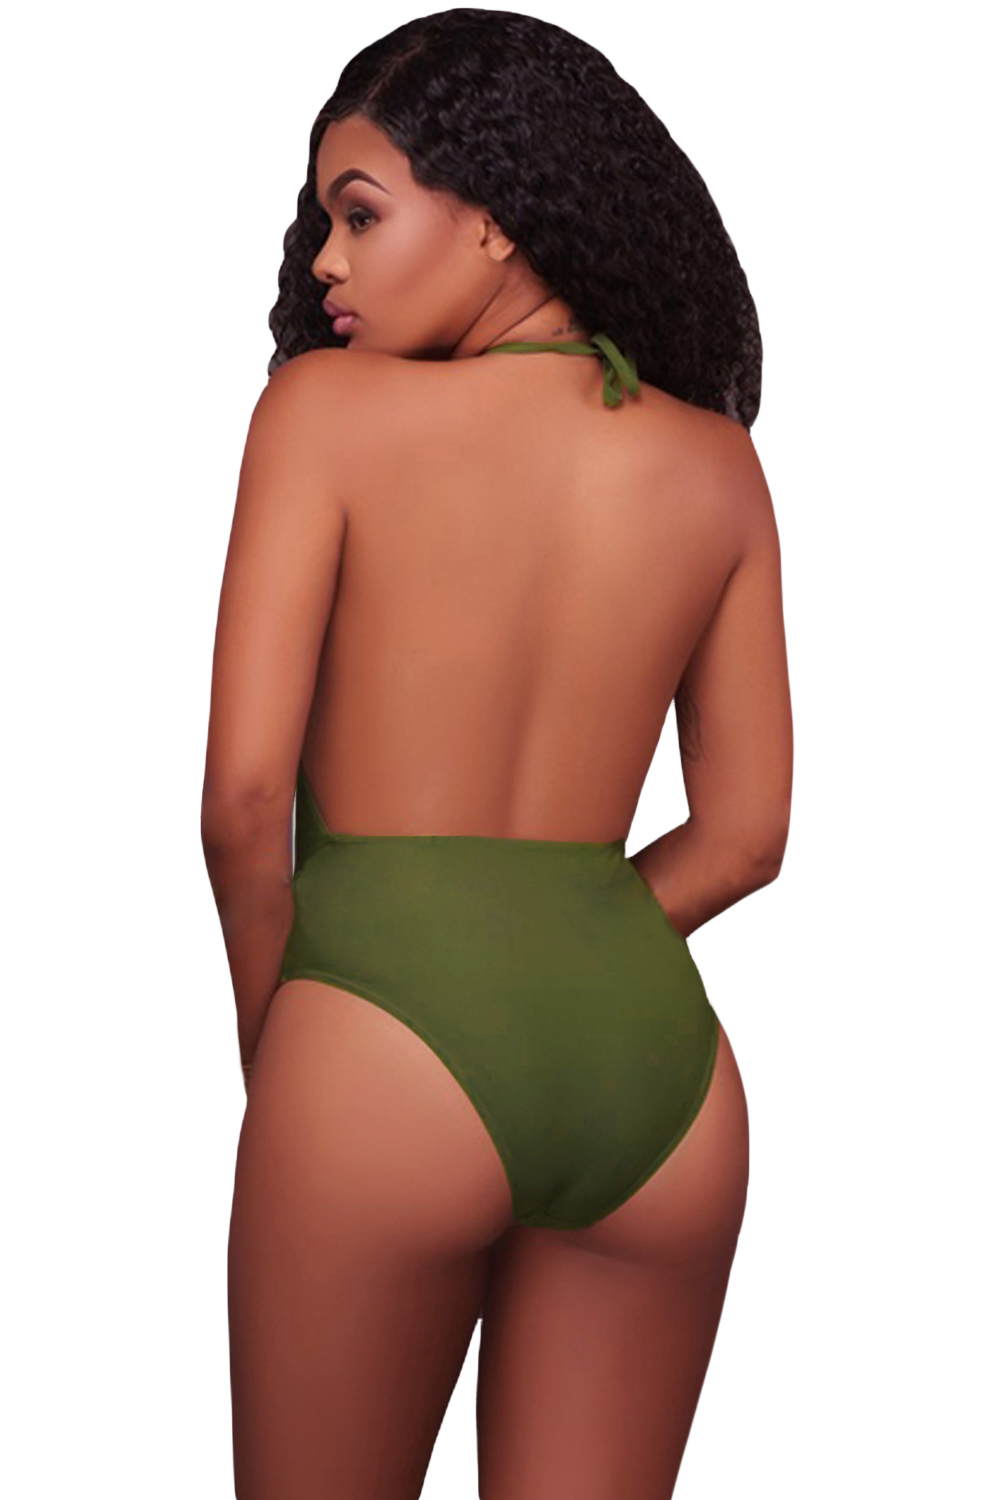 BY410523-9 ARMY GREEN CAGED FRONT HALTER ONE PIECE SWIMSUIT